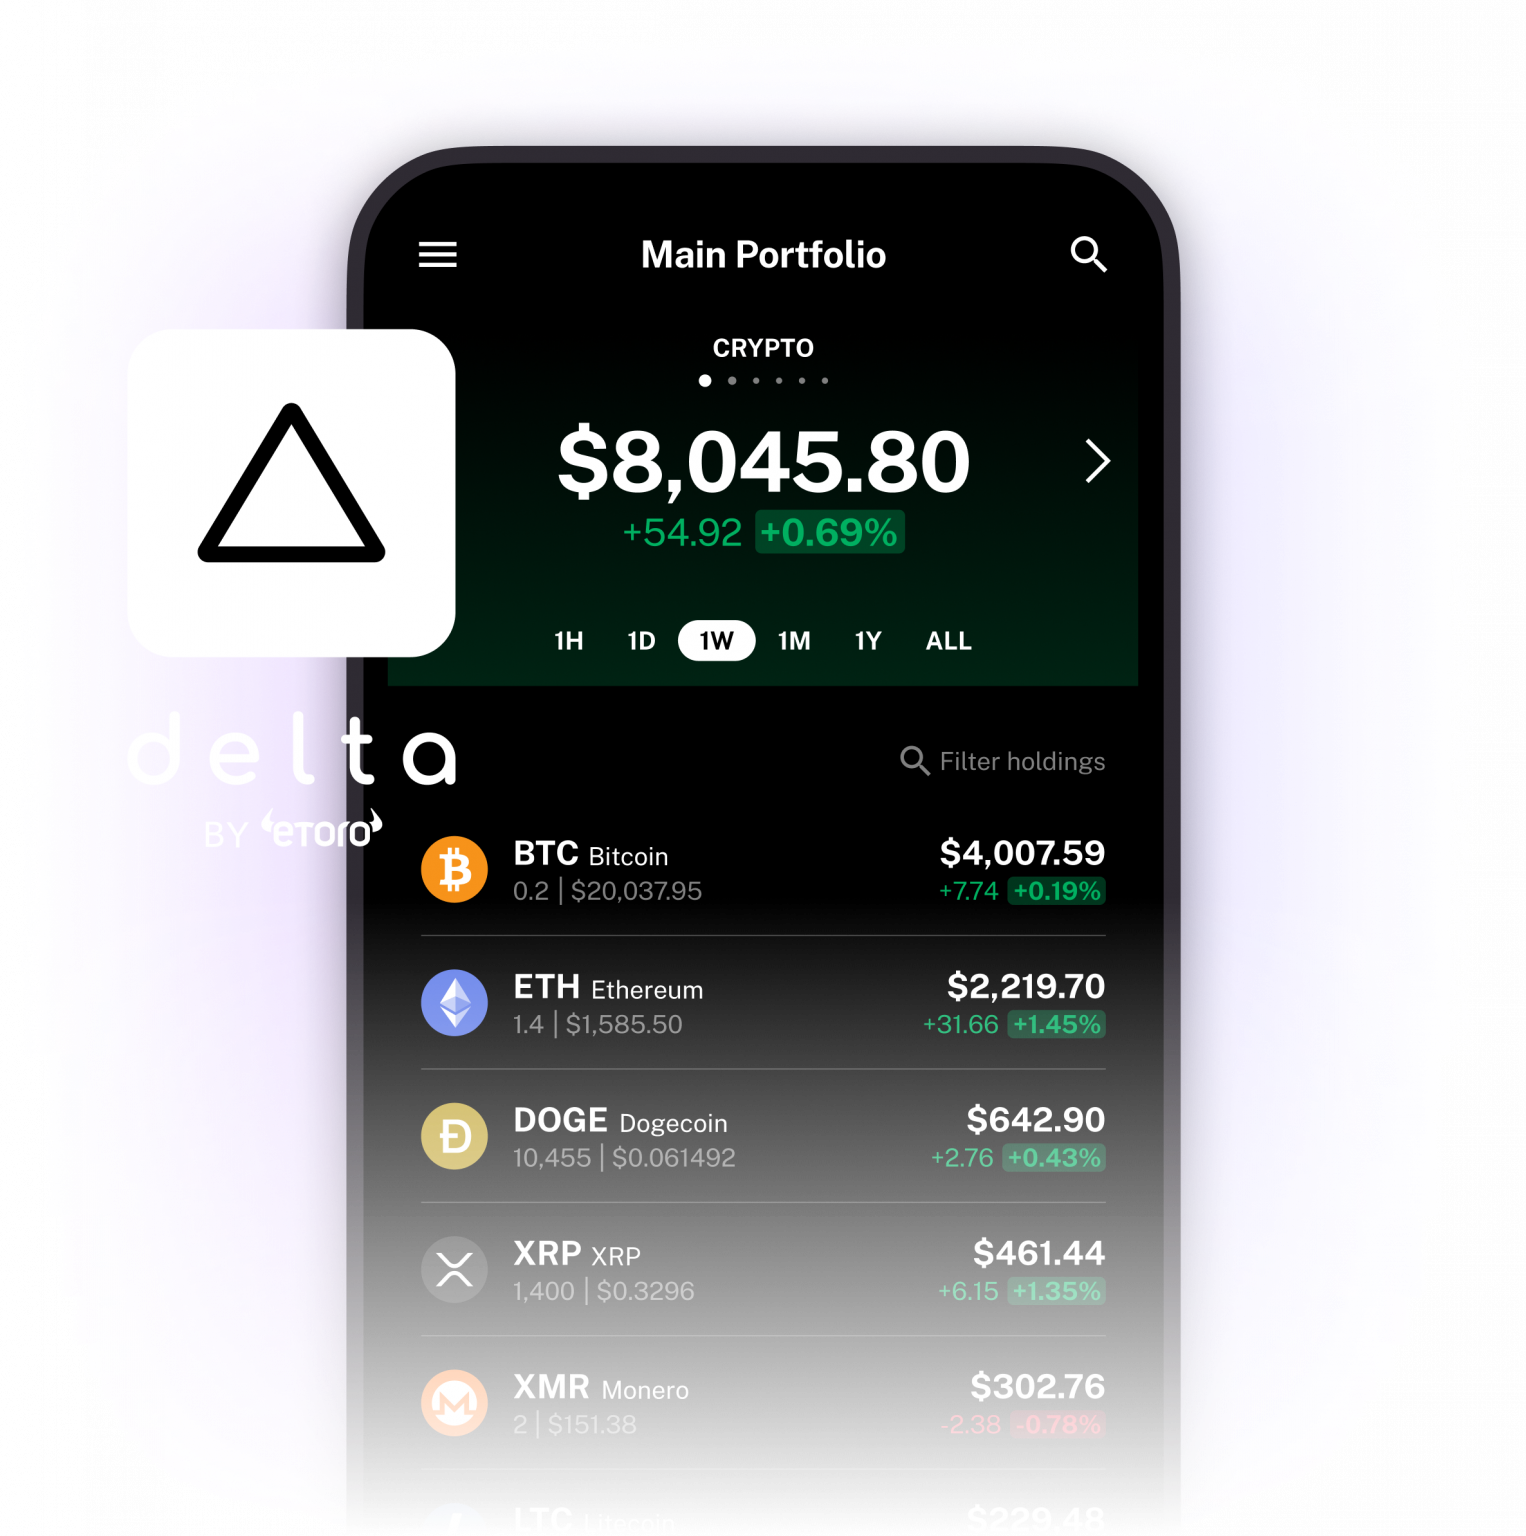 Delta App Example and how they inform users why crypto spiked today